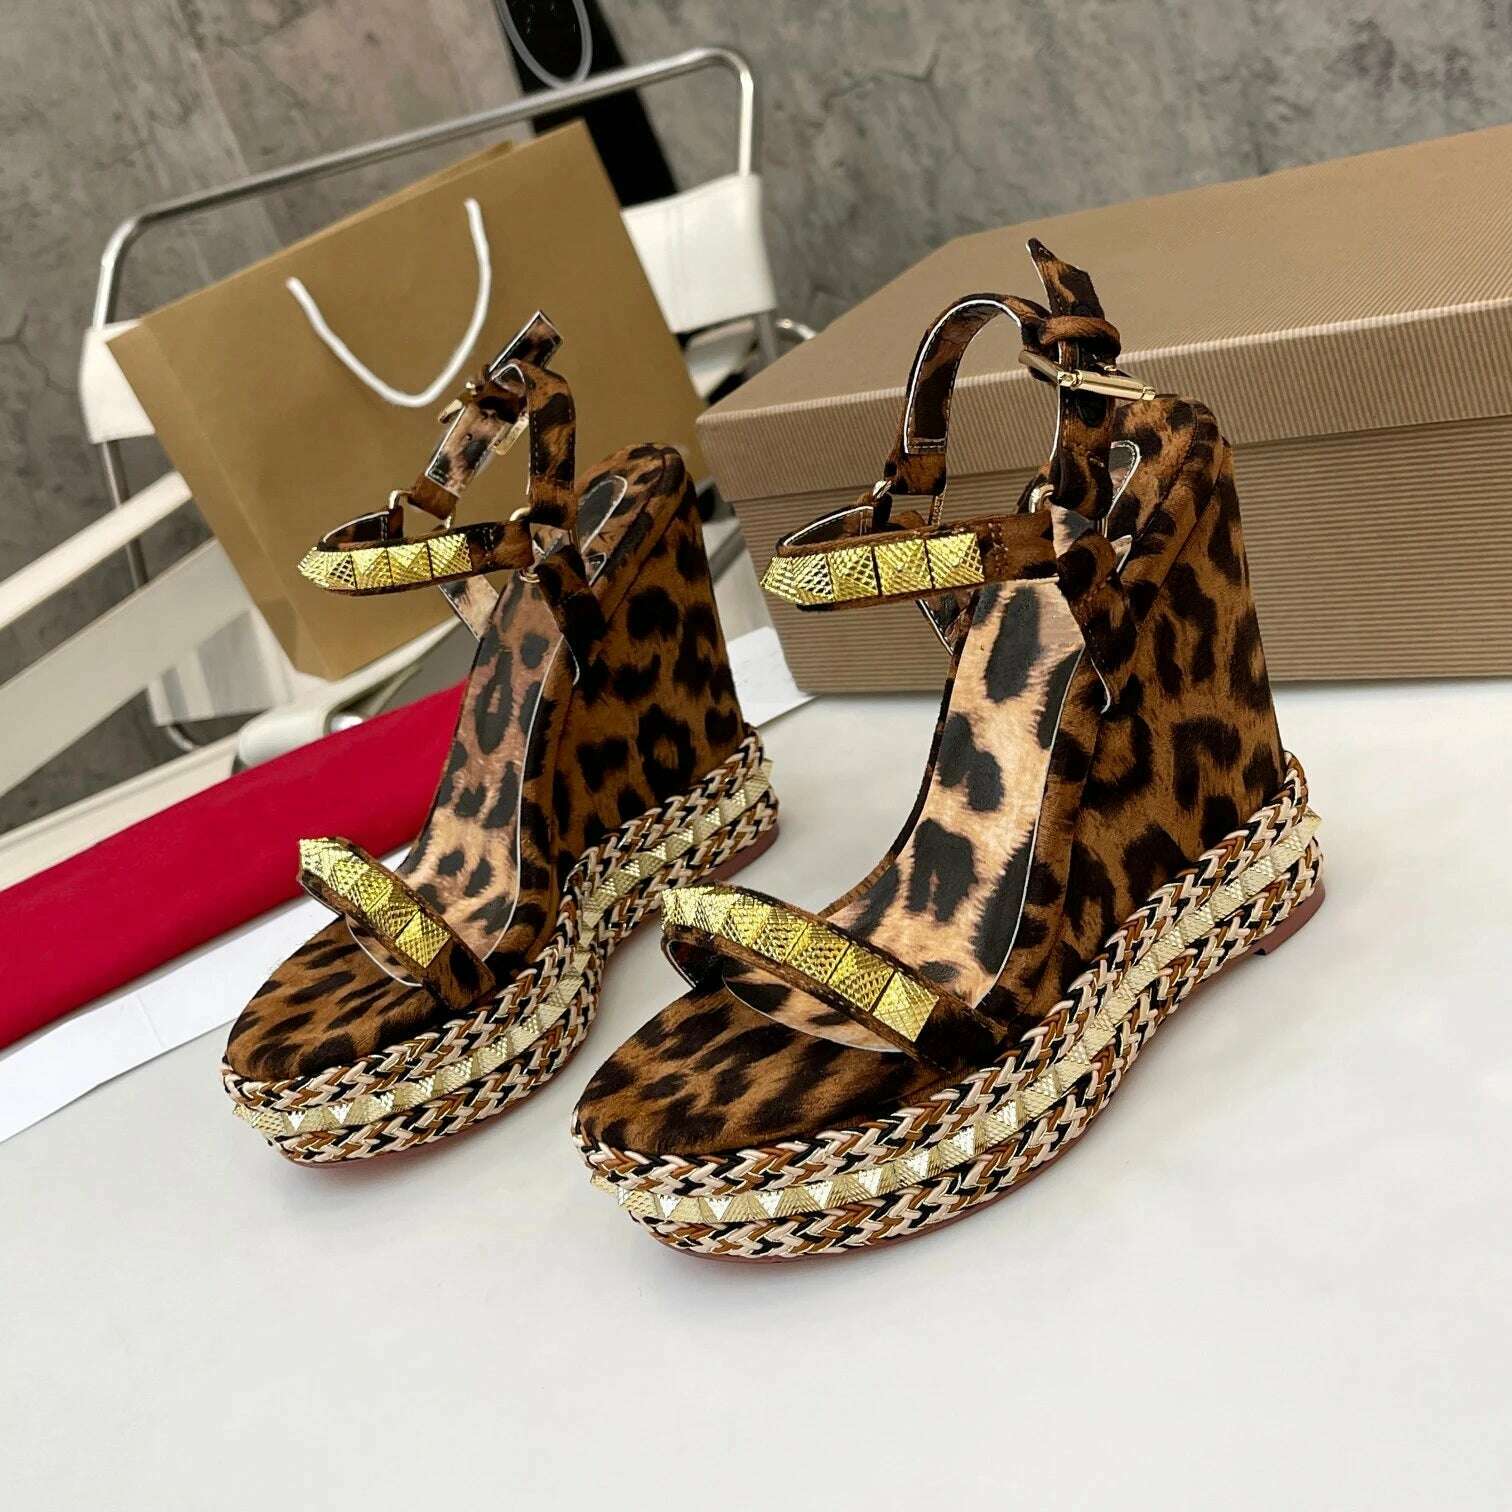 KIMLUD, Shoes For Women Size35-41 Genuine Leather Sandals Wedges Super High Heels Rivets Leopard Pumps Flat Platform Zapatillas Mujer, KIMLUD Women's Clothes